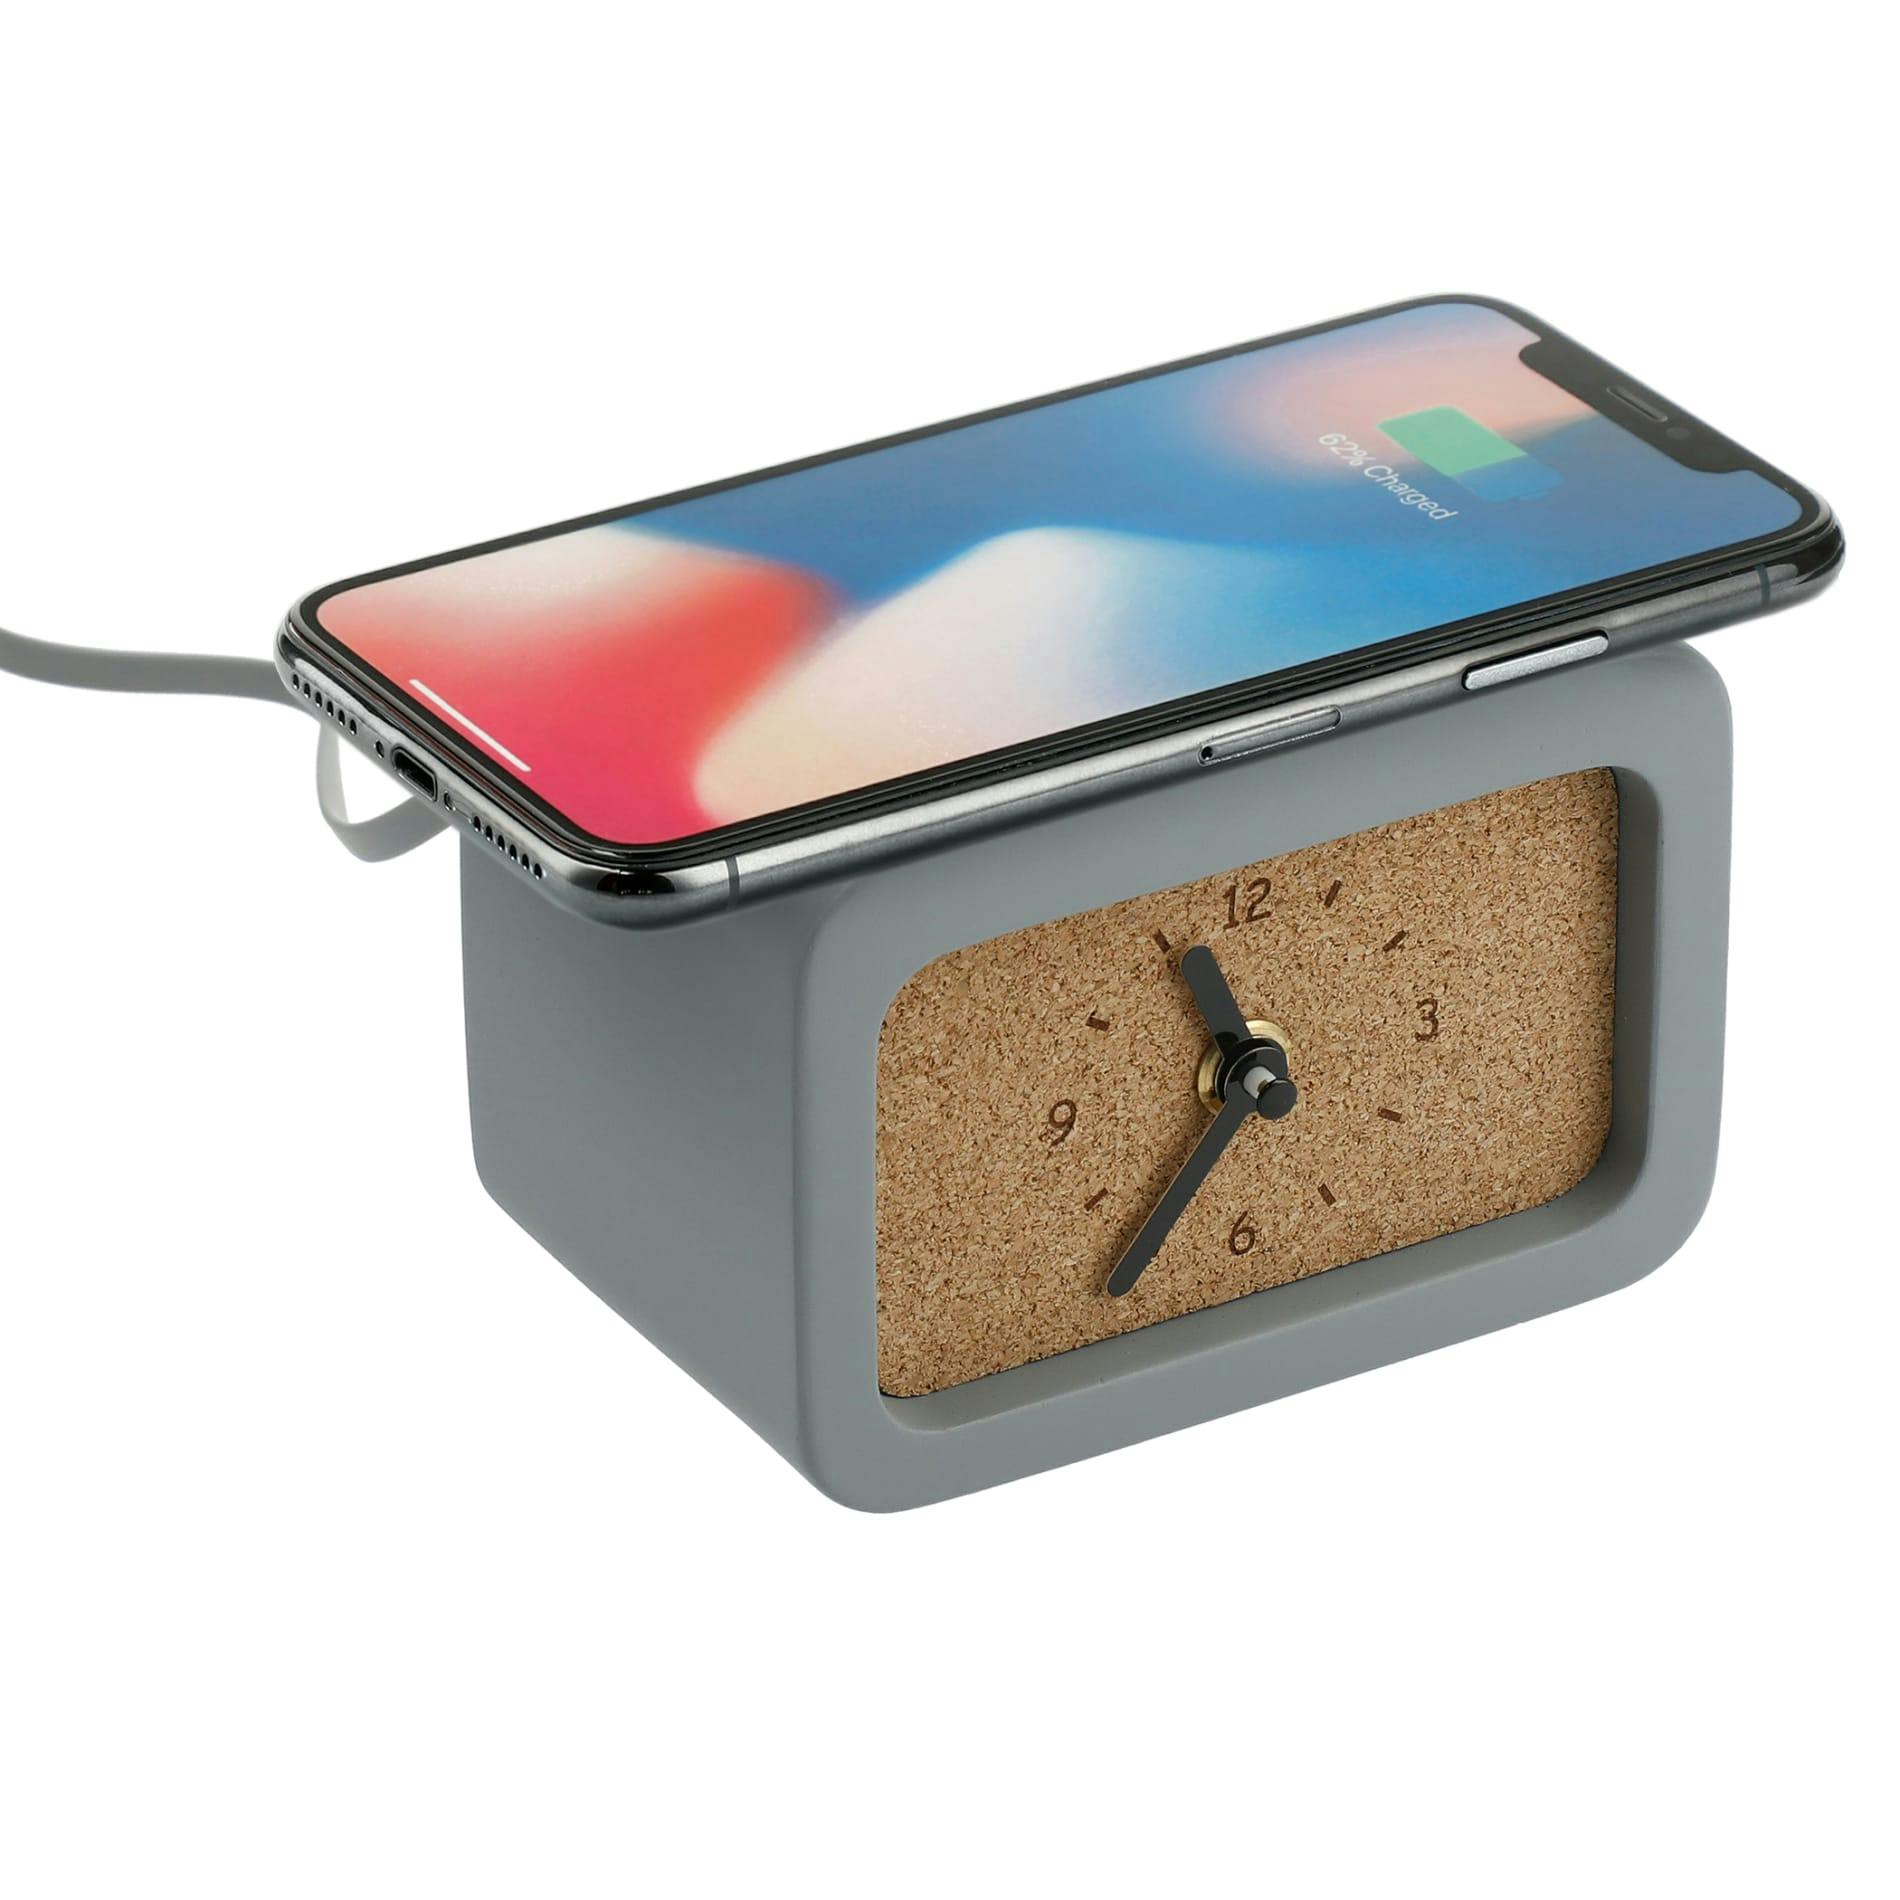 Set in Stone Wireless Charging Desk Clock - additional Image 4